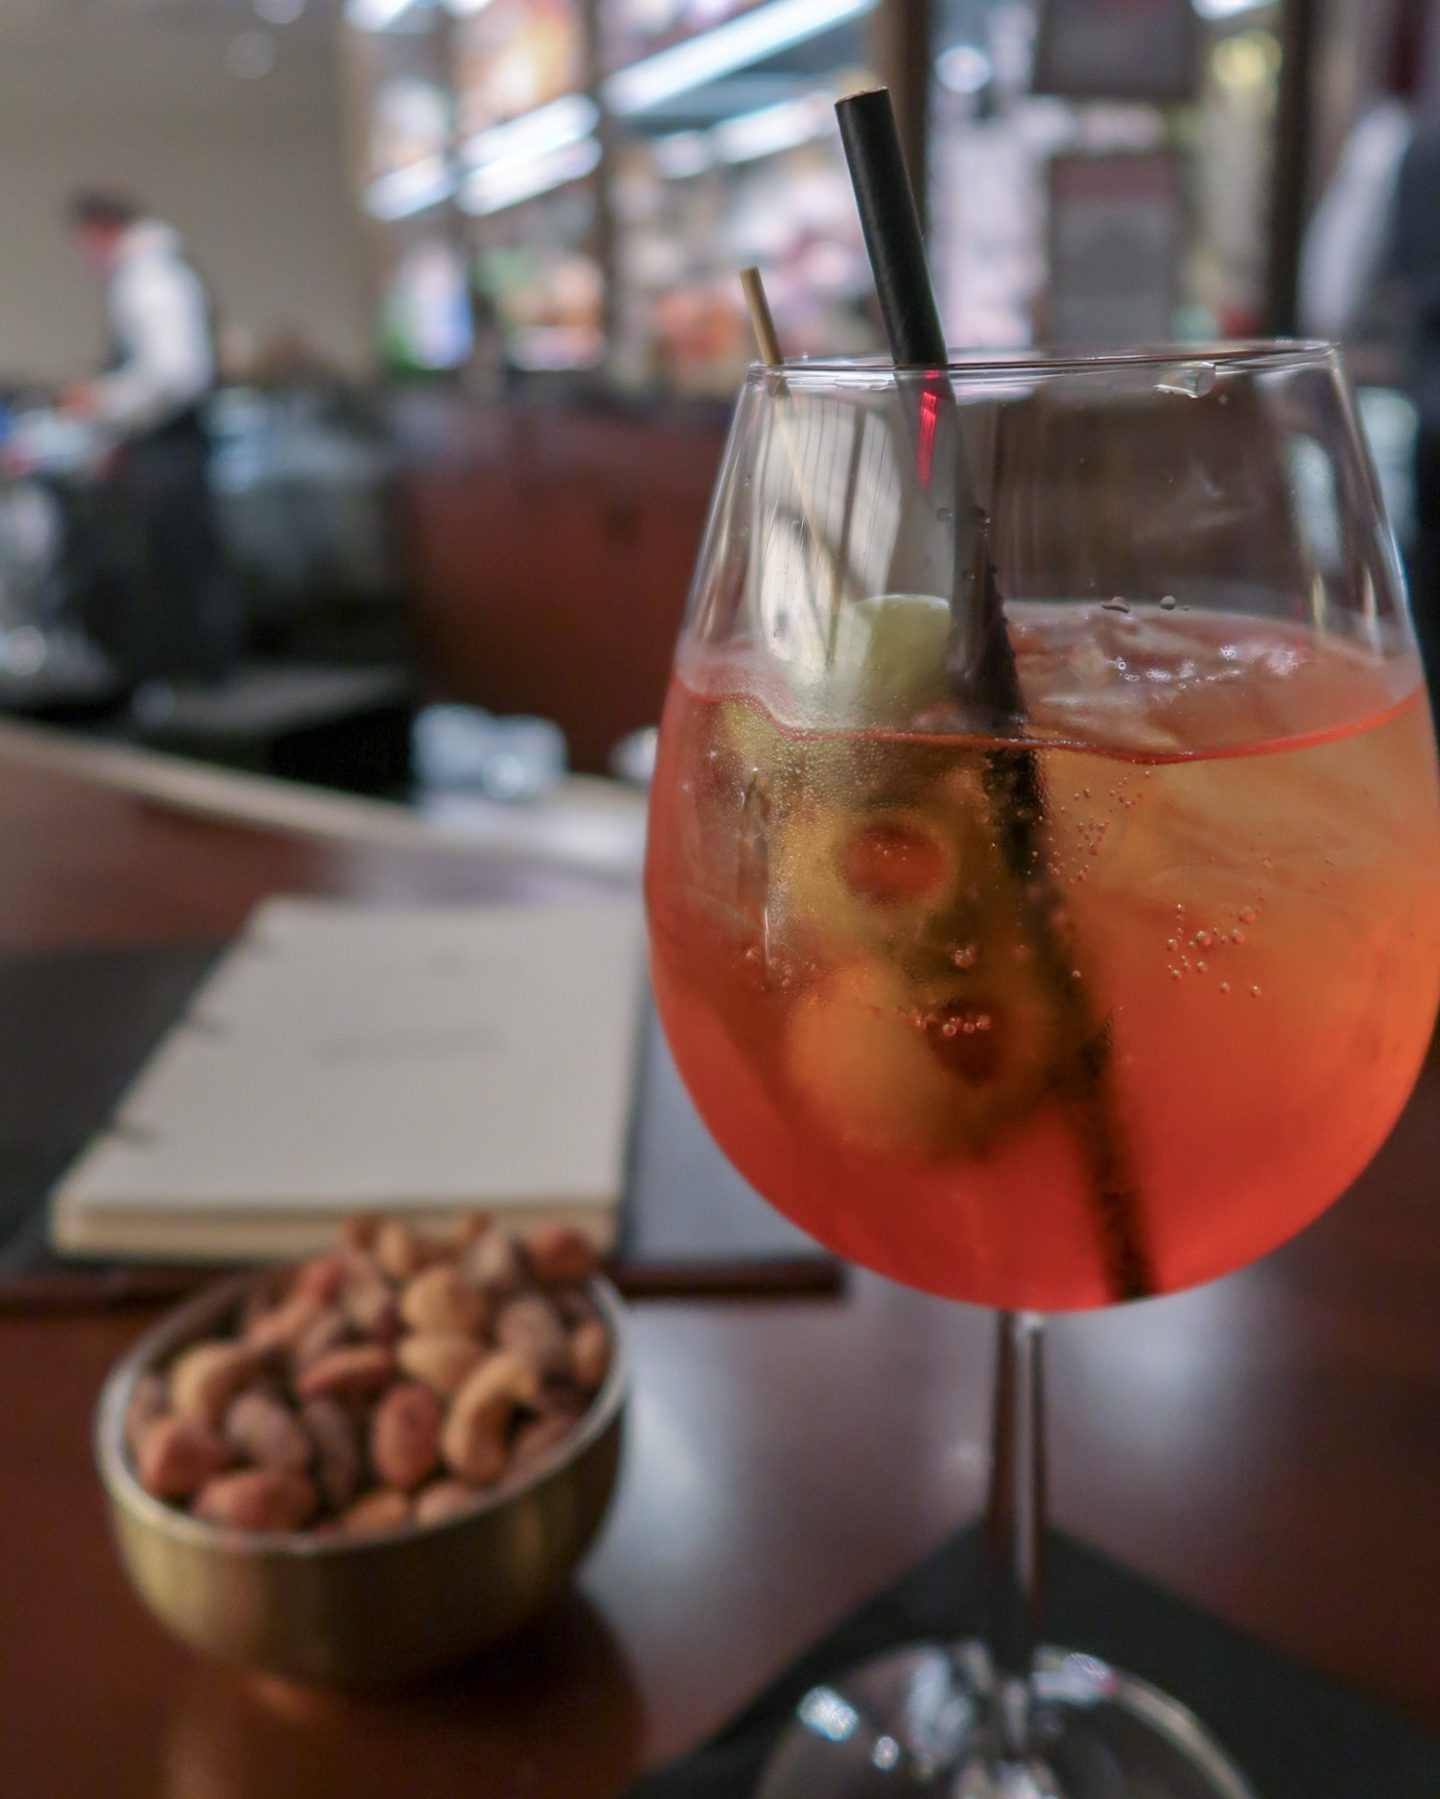 Dirty aperol spritz...are you kidding me?